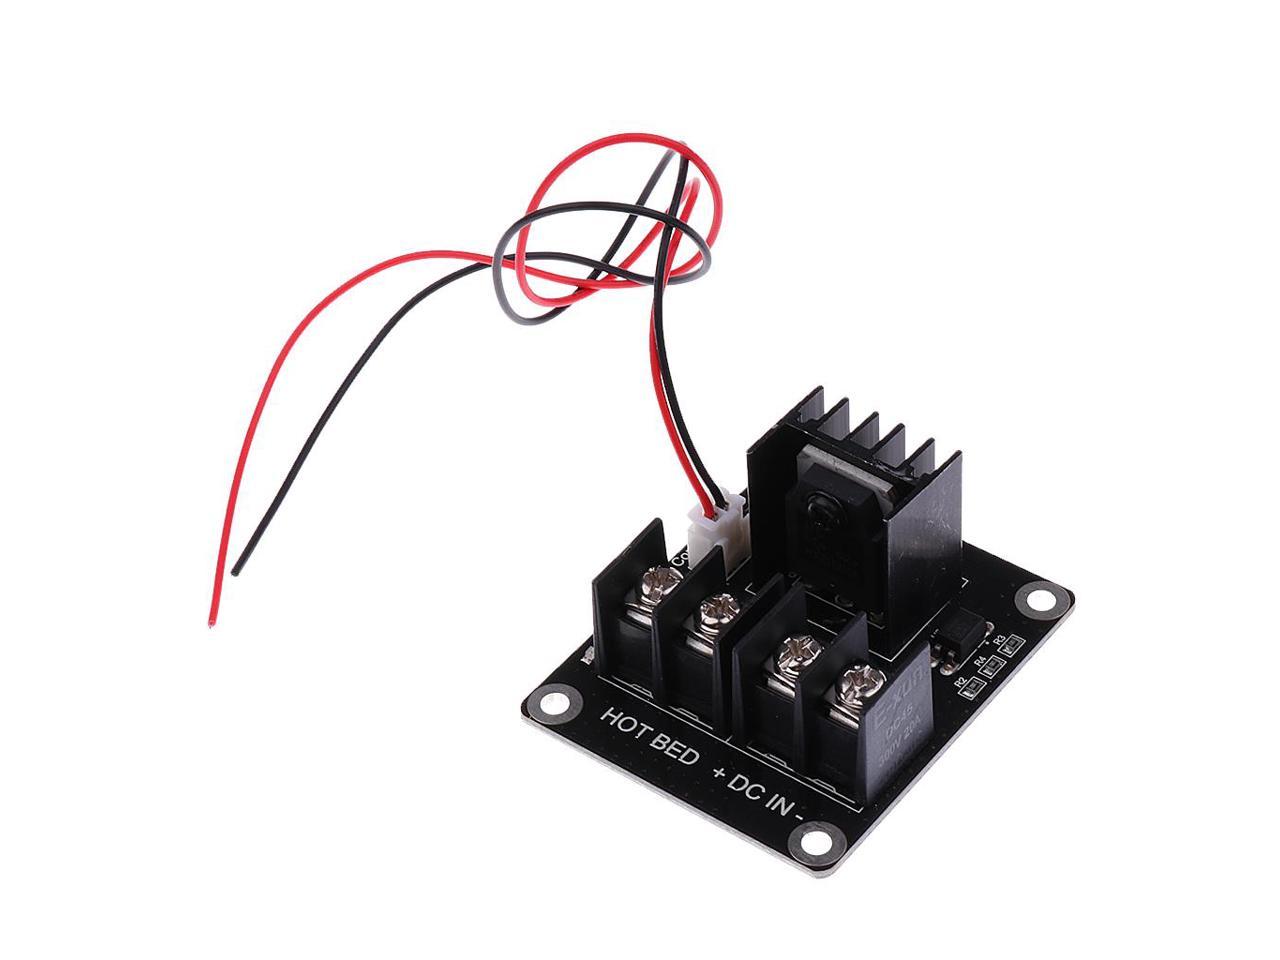 3D Printer Part Heat Bed Power Module Hot Bed Power Expansion Board w/ Cable